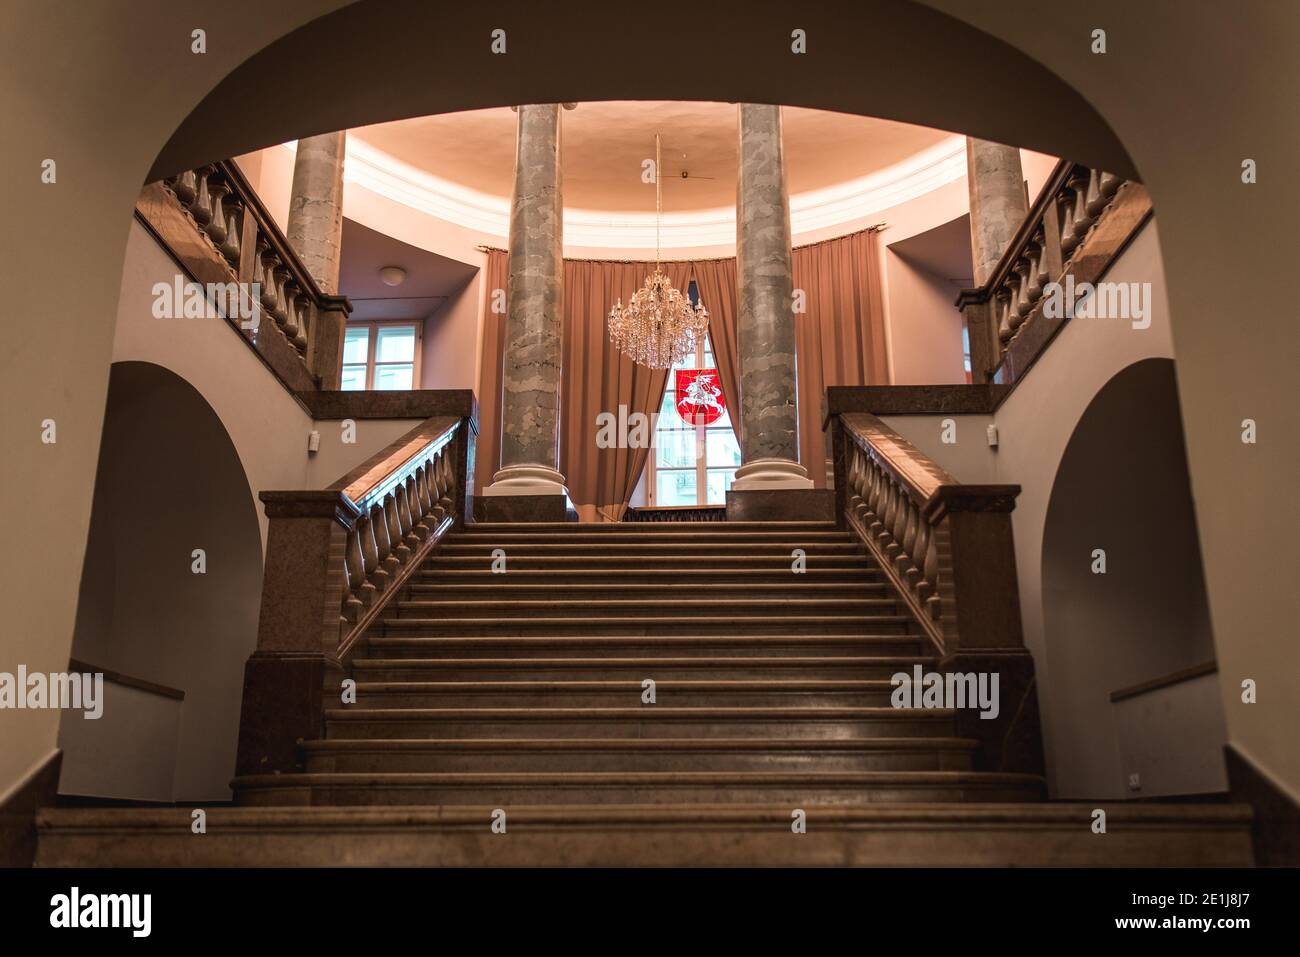 Vilnius, Lithuania - November 9, 2019: Interior of the Town Hall. Staircase leading to the columns, and window with curtains, coat of arms in middle. Stock Photo